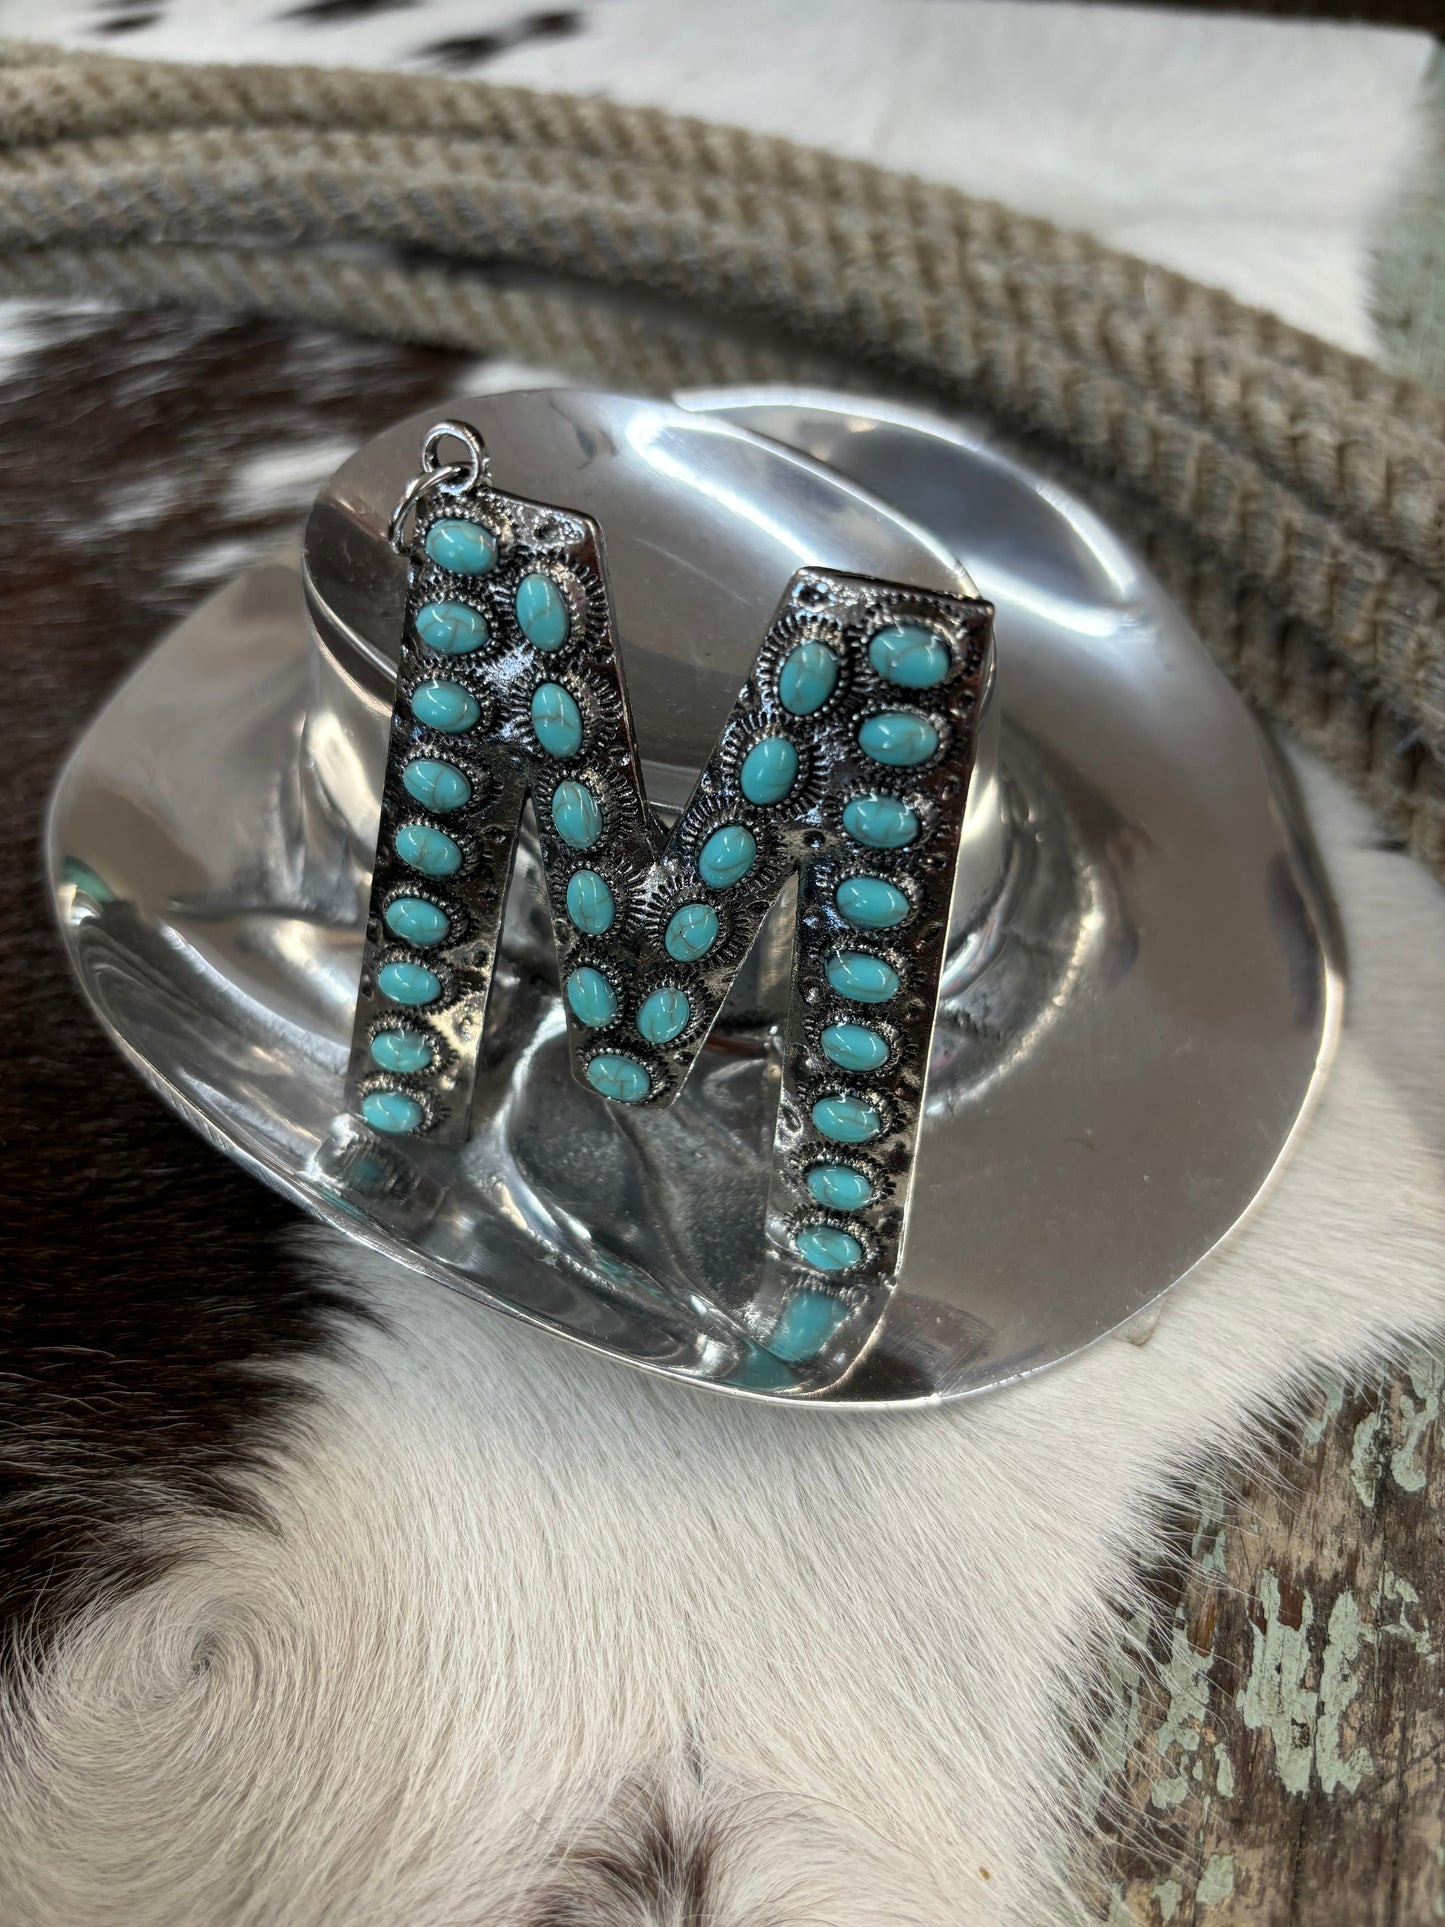 The Turquoise Initial Pendant